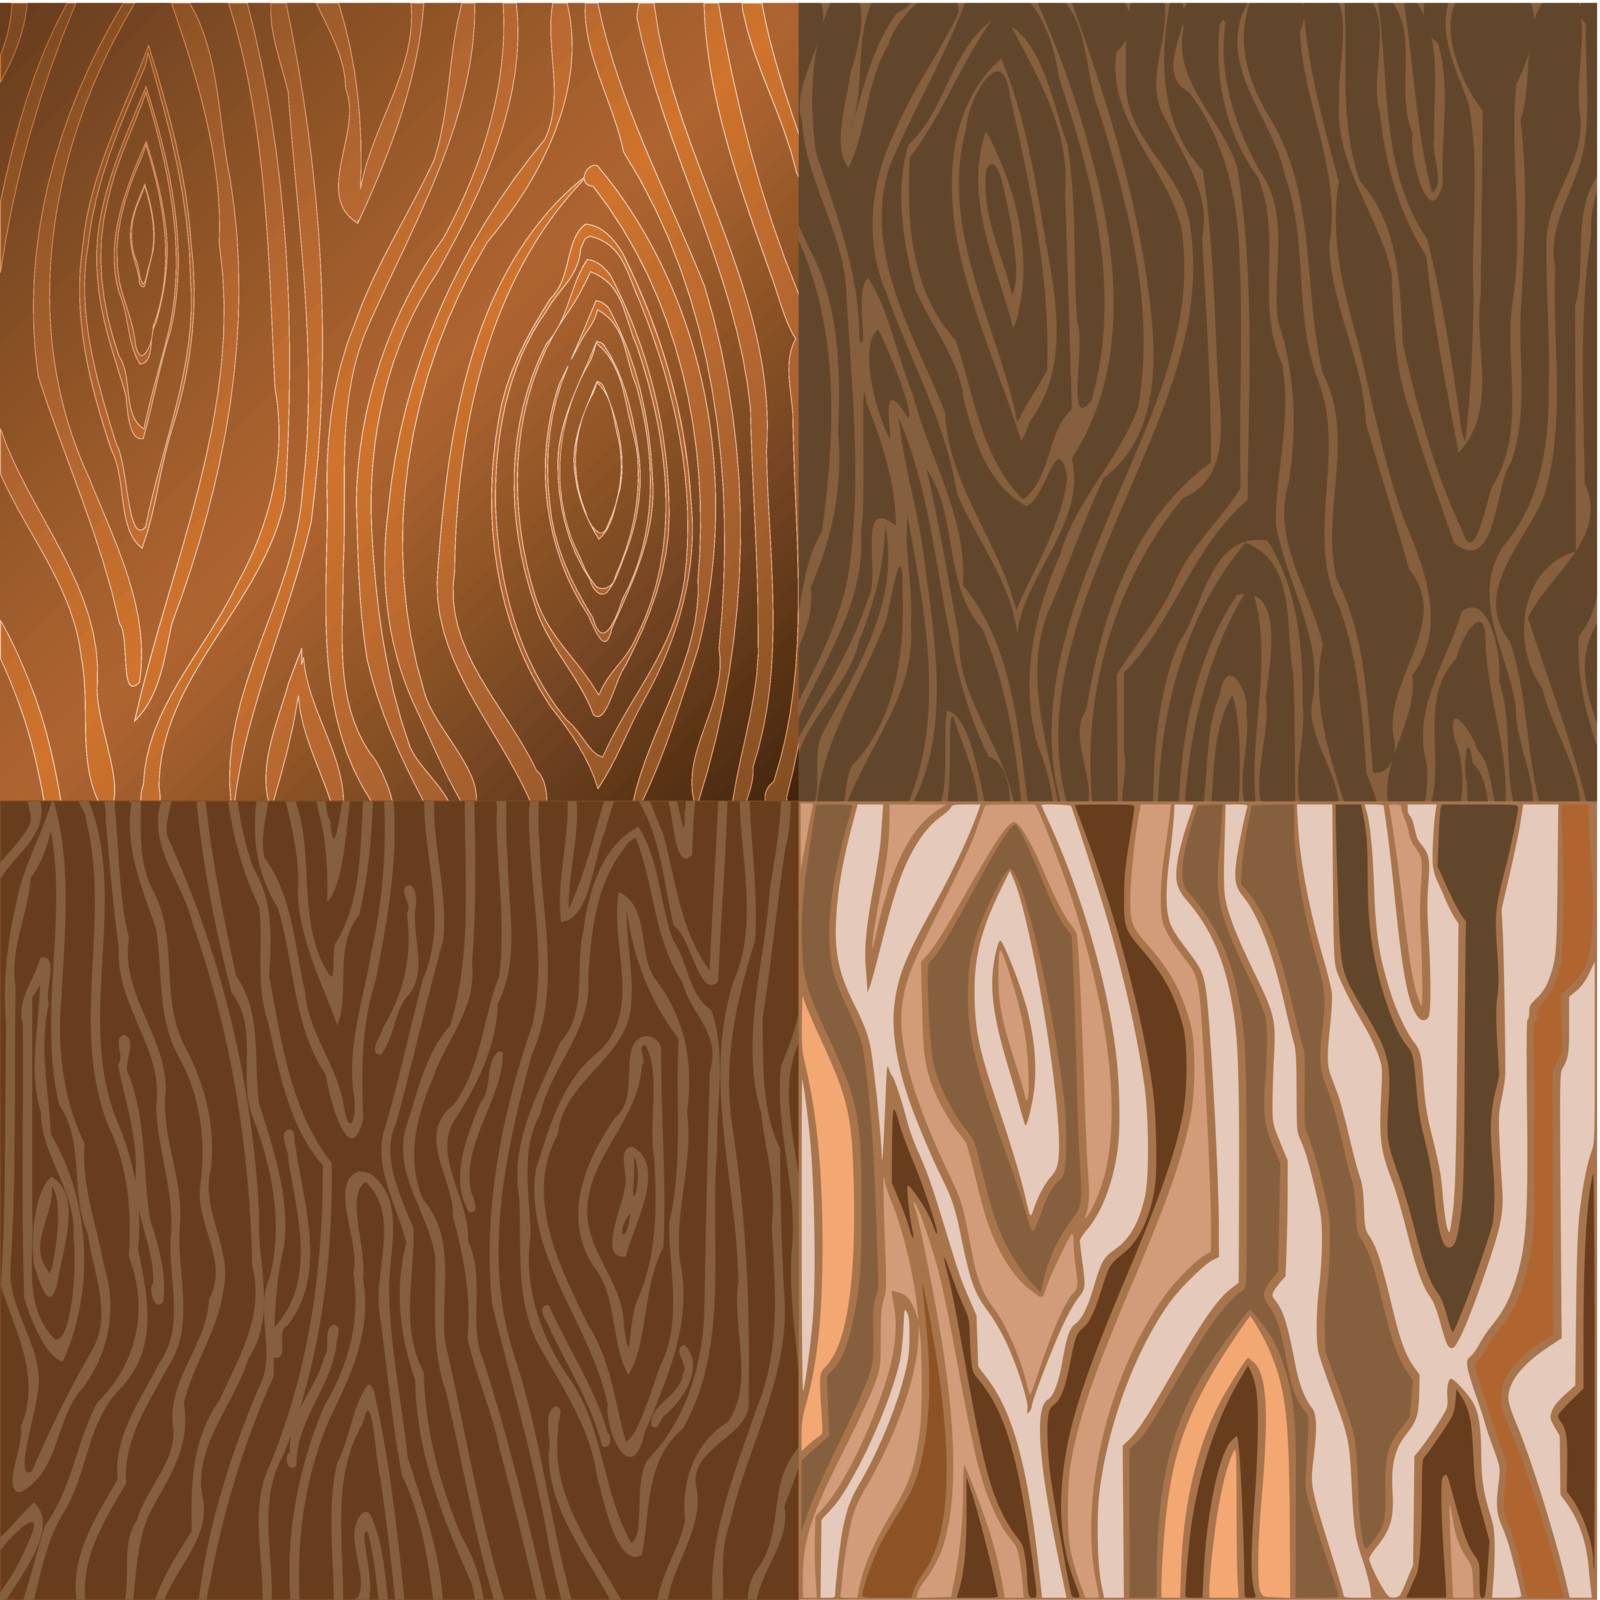  Set of vector illustrations of wooden texture by Larser